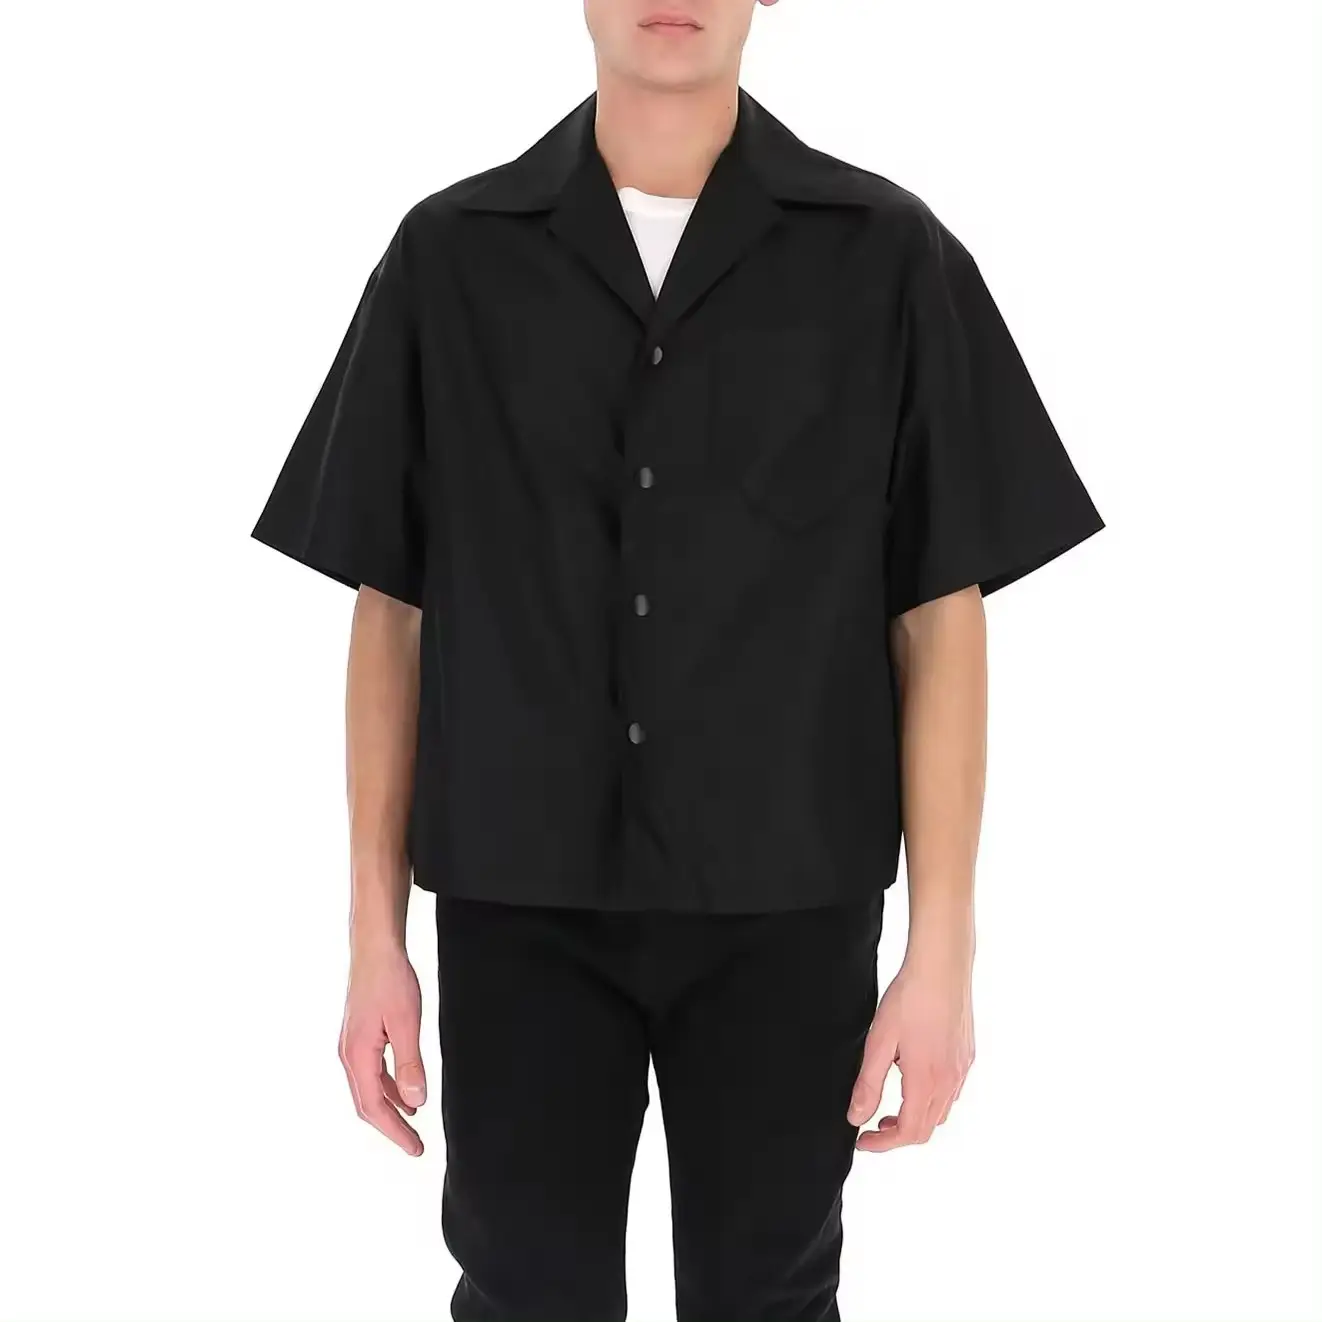 Whole Custom Summer Casual Men Boxy Fit Light Weight Button Down Nylon Short Sleeved Shirt